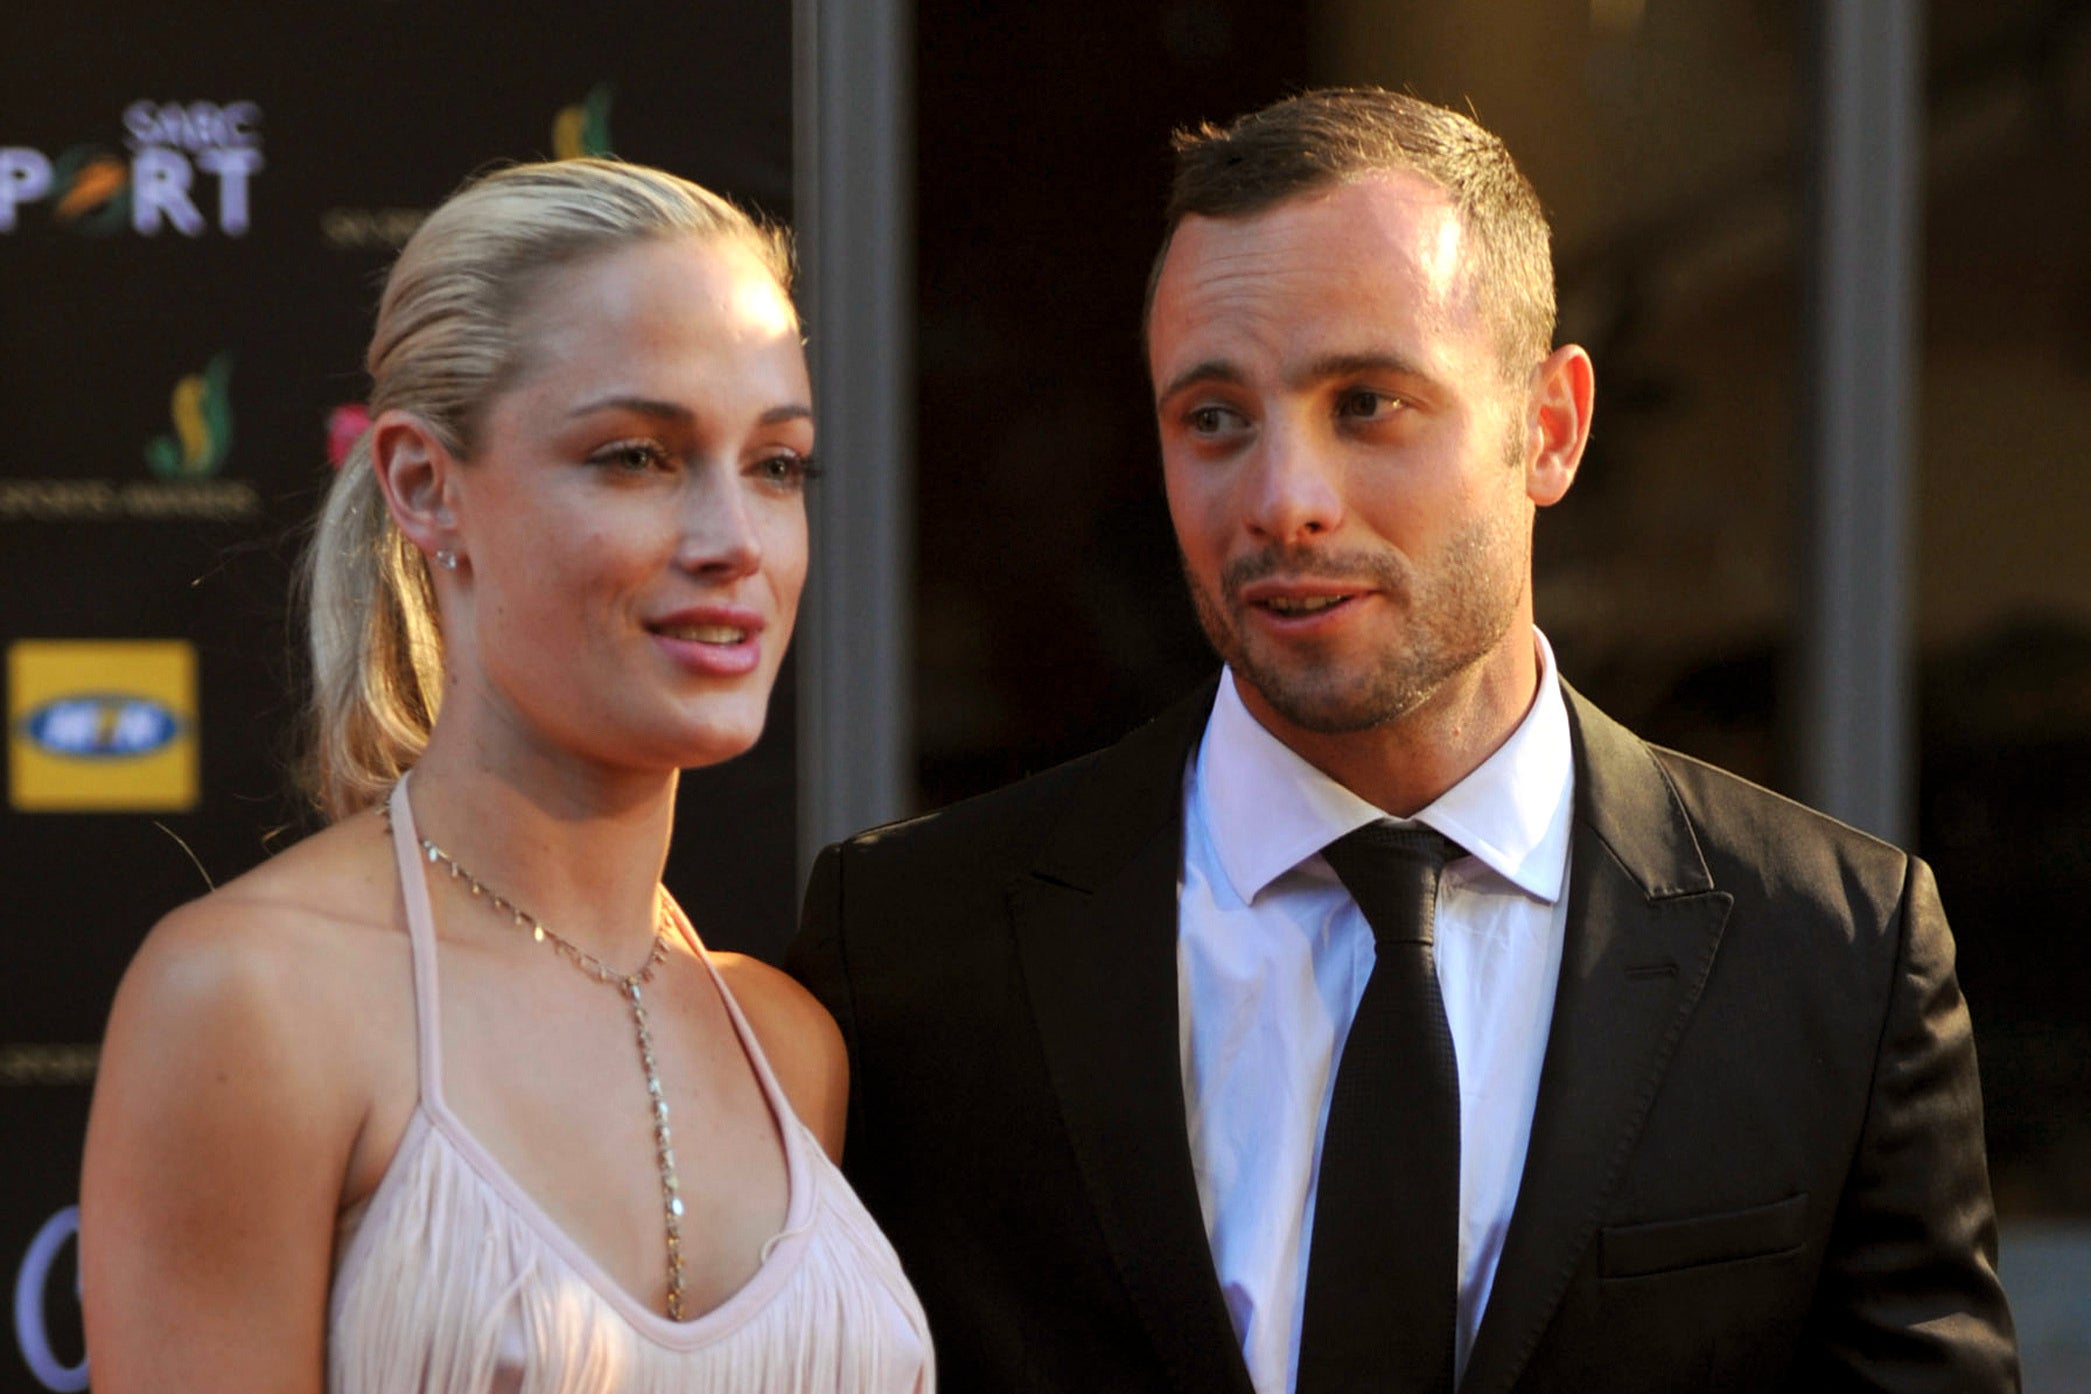 South African Olympic athlete Oscar Pistorius, right, and Reeva Steenkamp in 2012